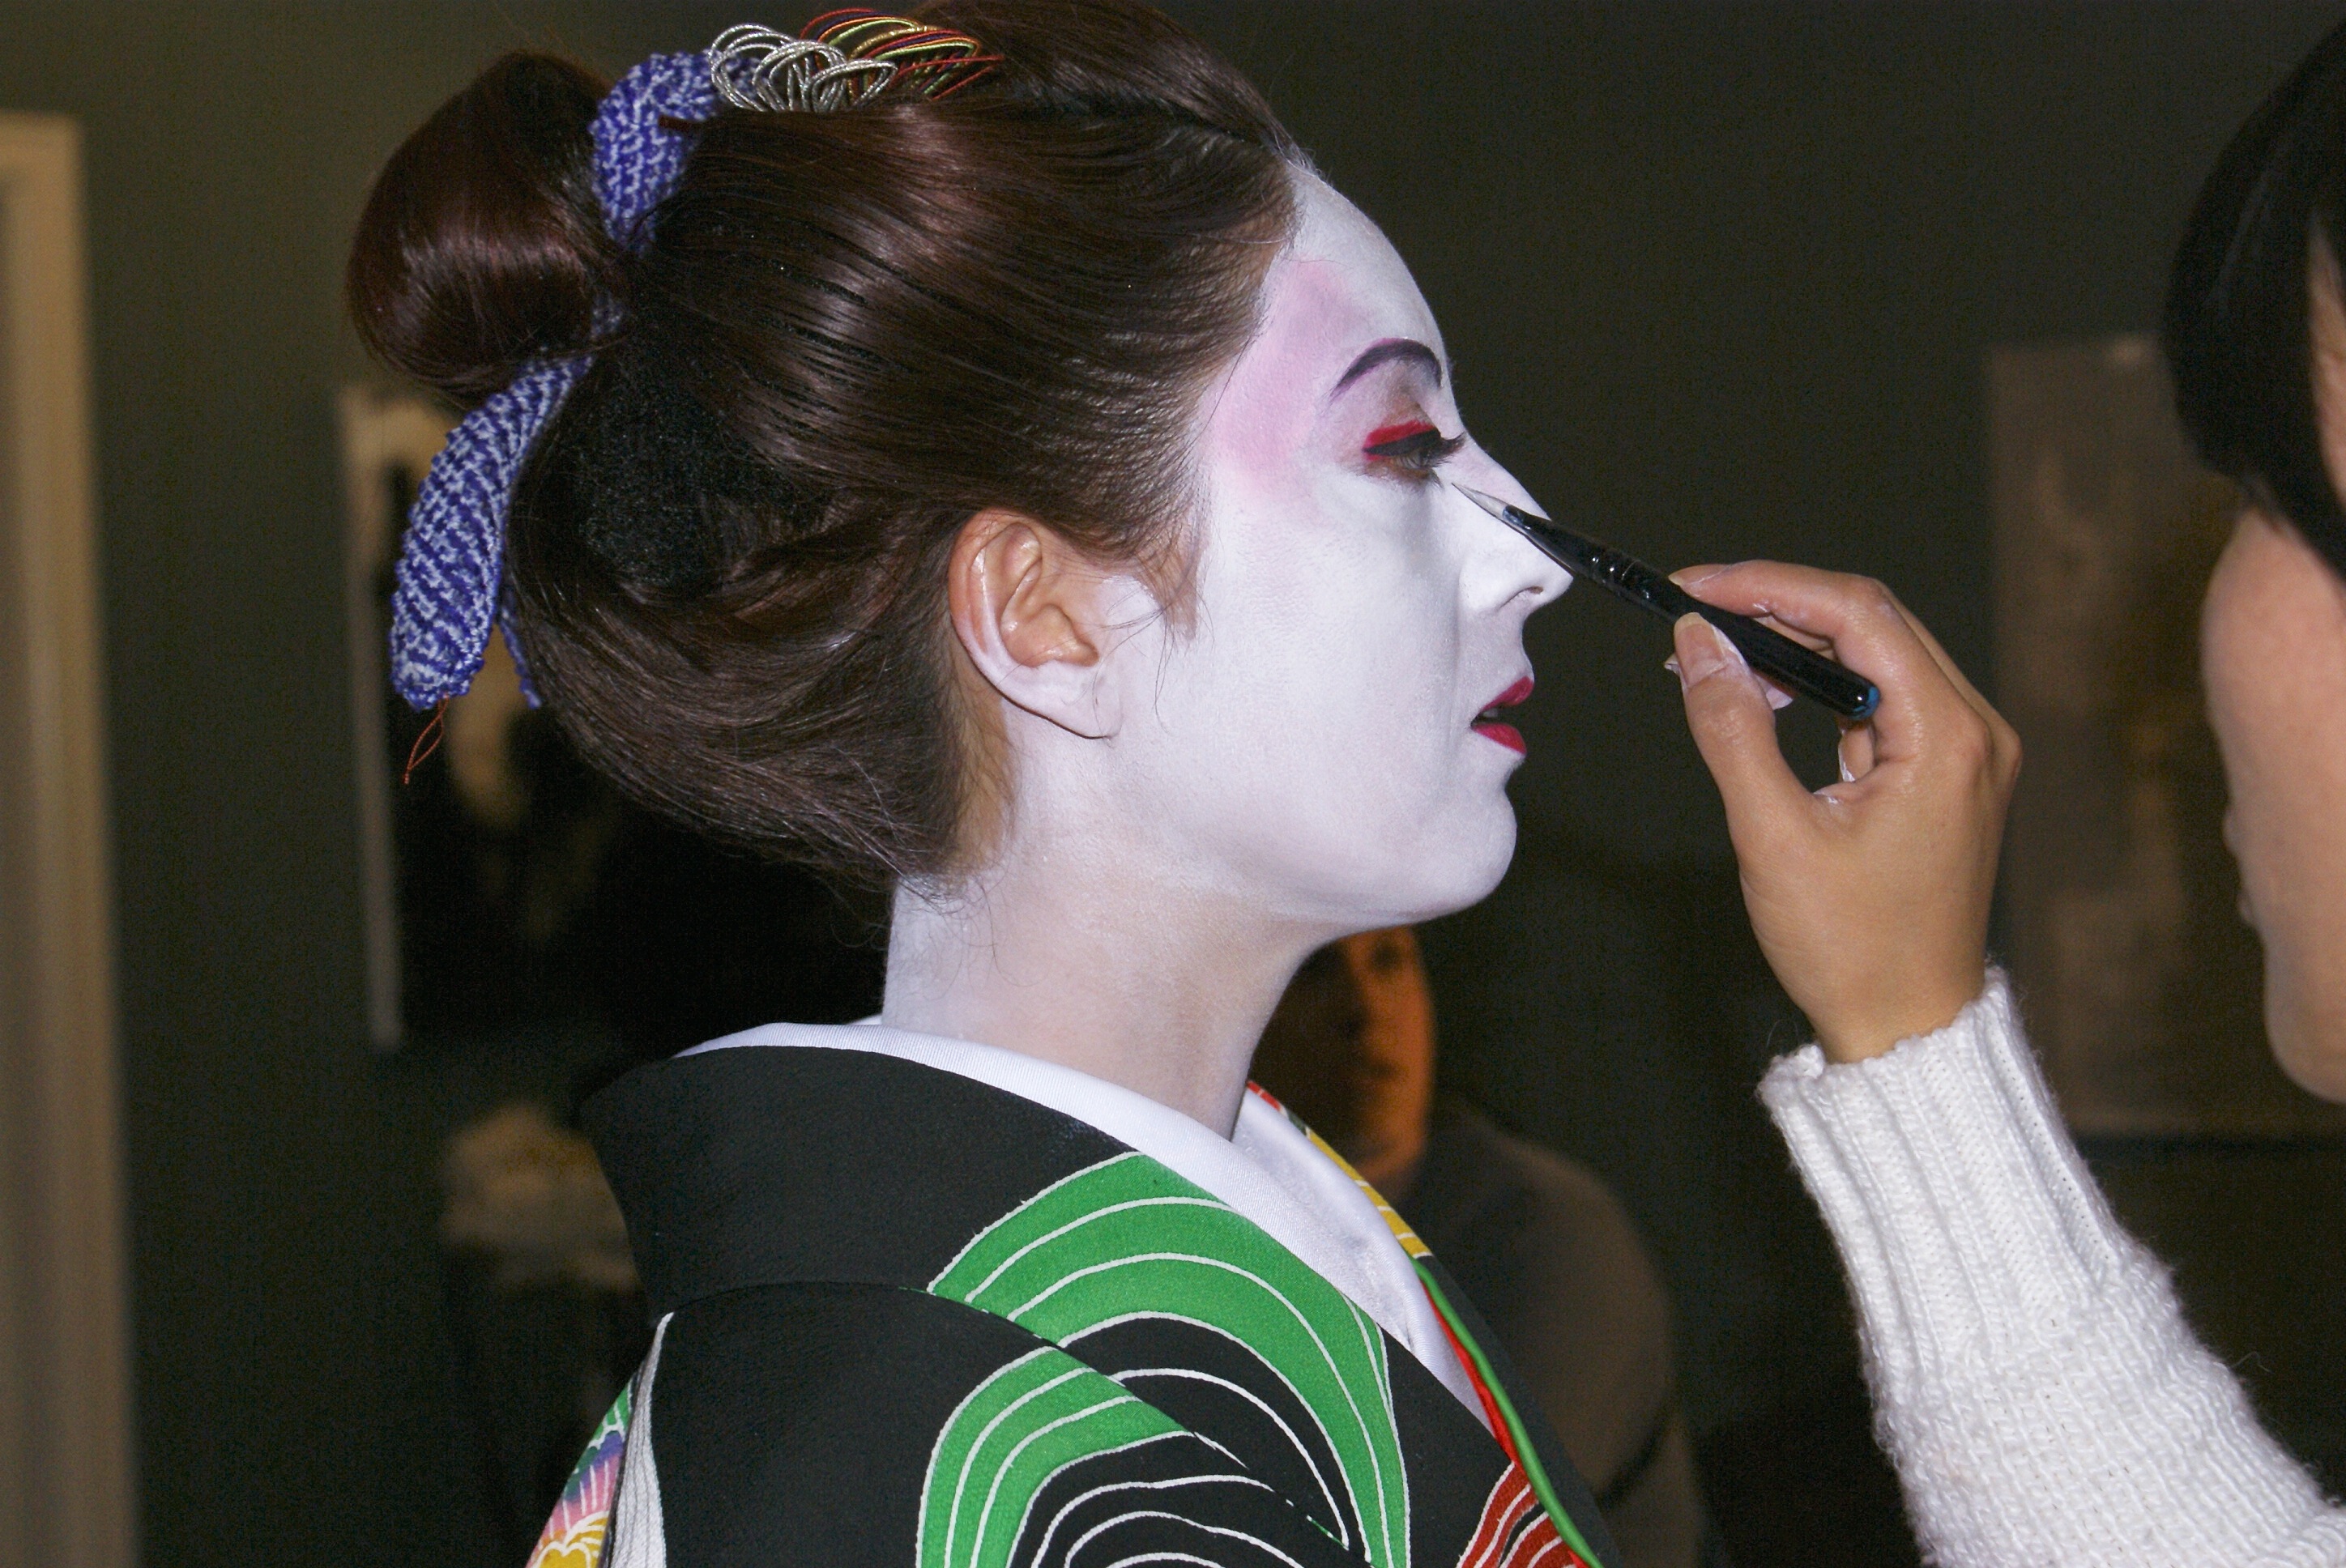 Genevieve getting a touch up on Turning Japanese set 09.